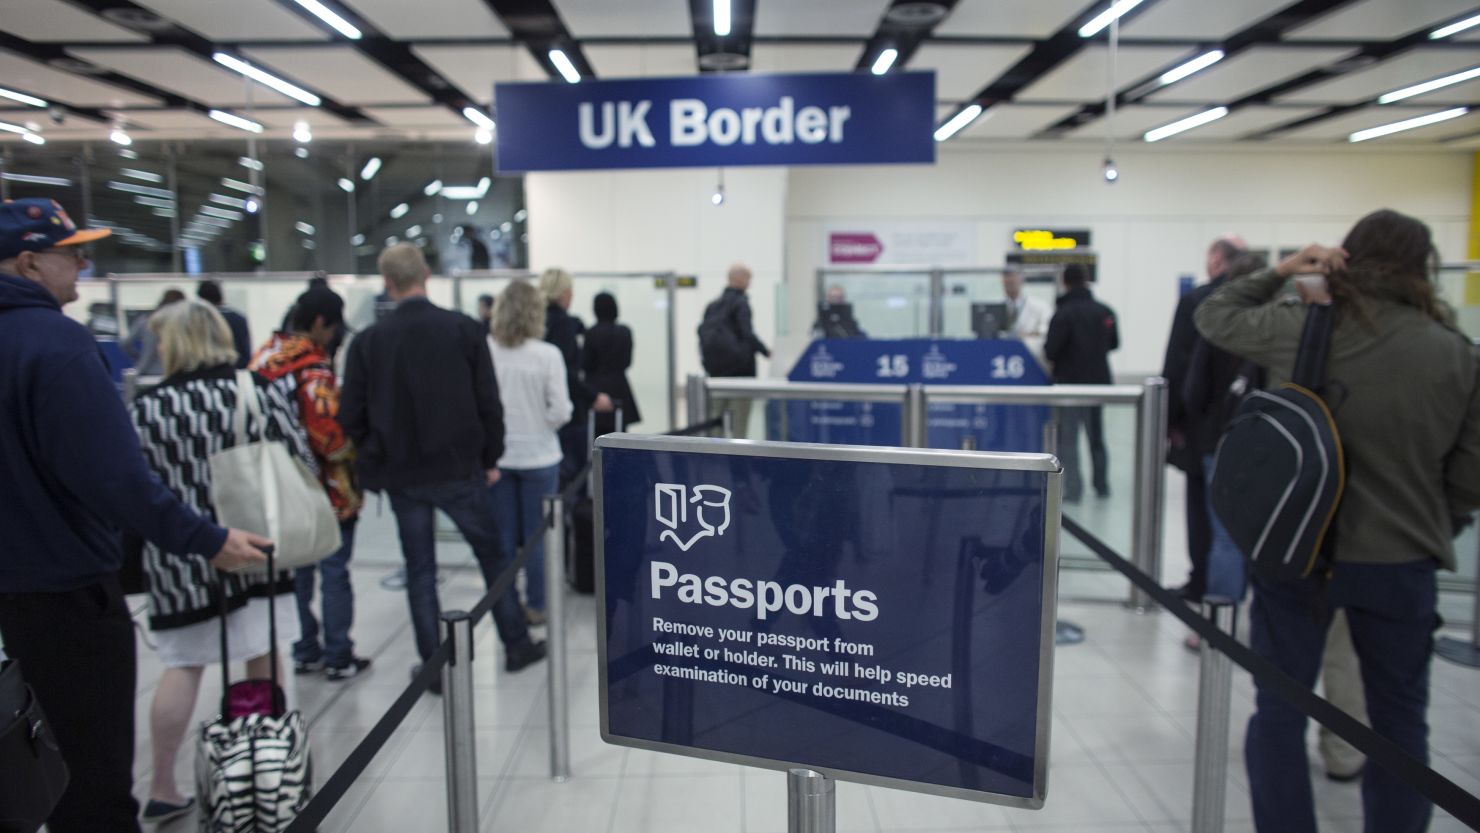 Border Force check the passports of passengers arriving at Gatwick Airport on May 28, 2014 in London, England.